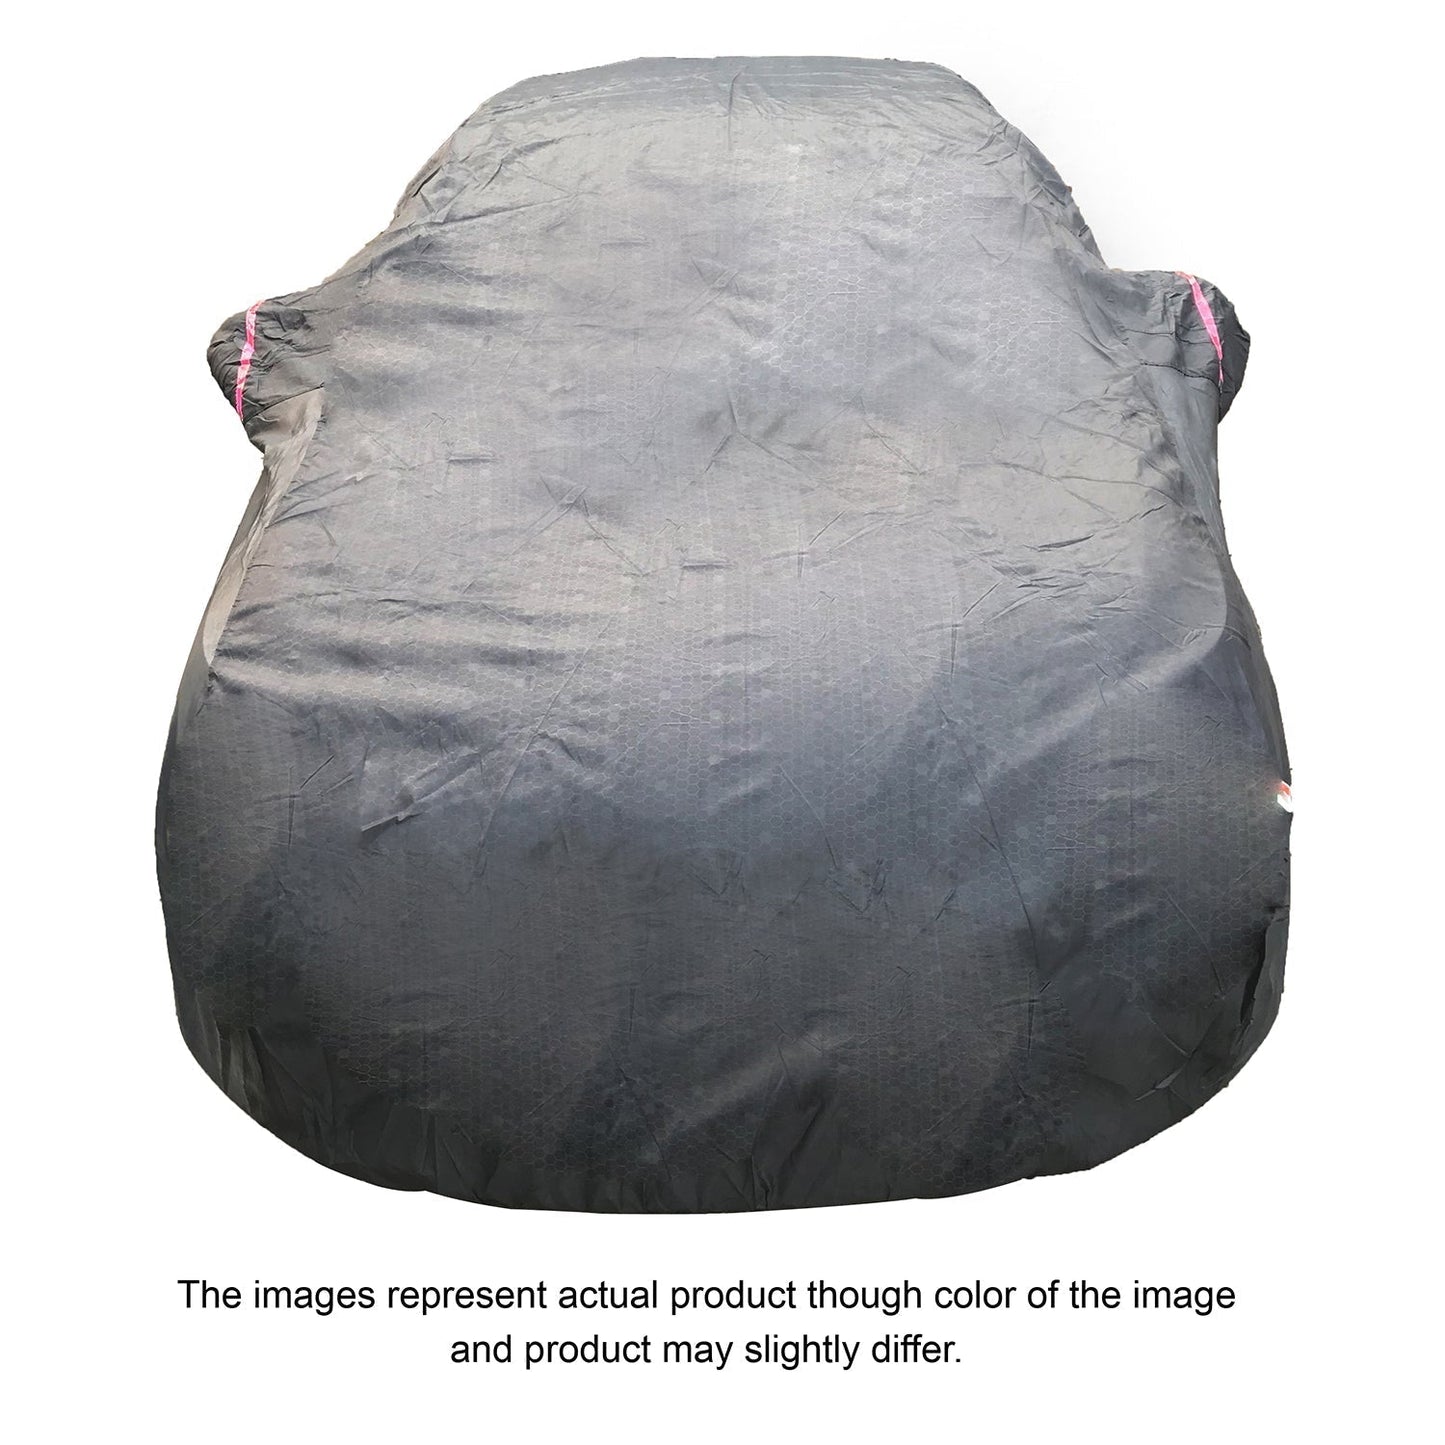 Oshotto 100% Dust Proof, Water Resistant Grey Car Body Cover with Mirror Pocket For Volkswagen Jetta